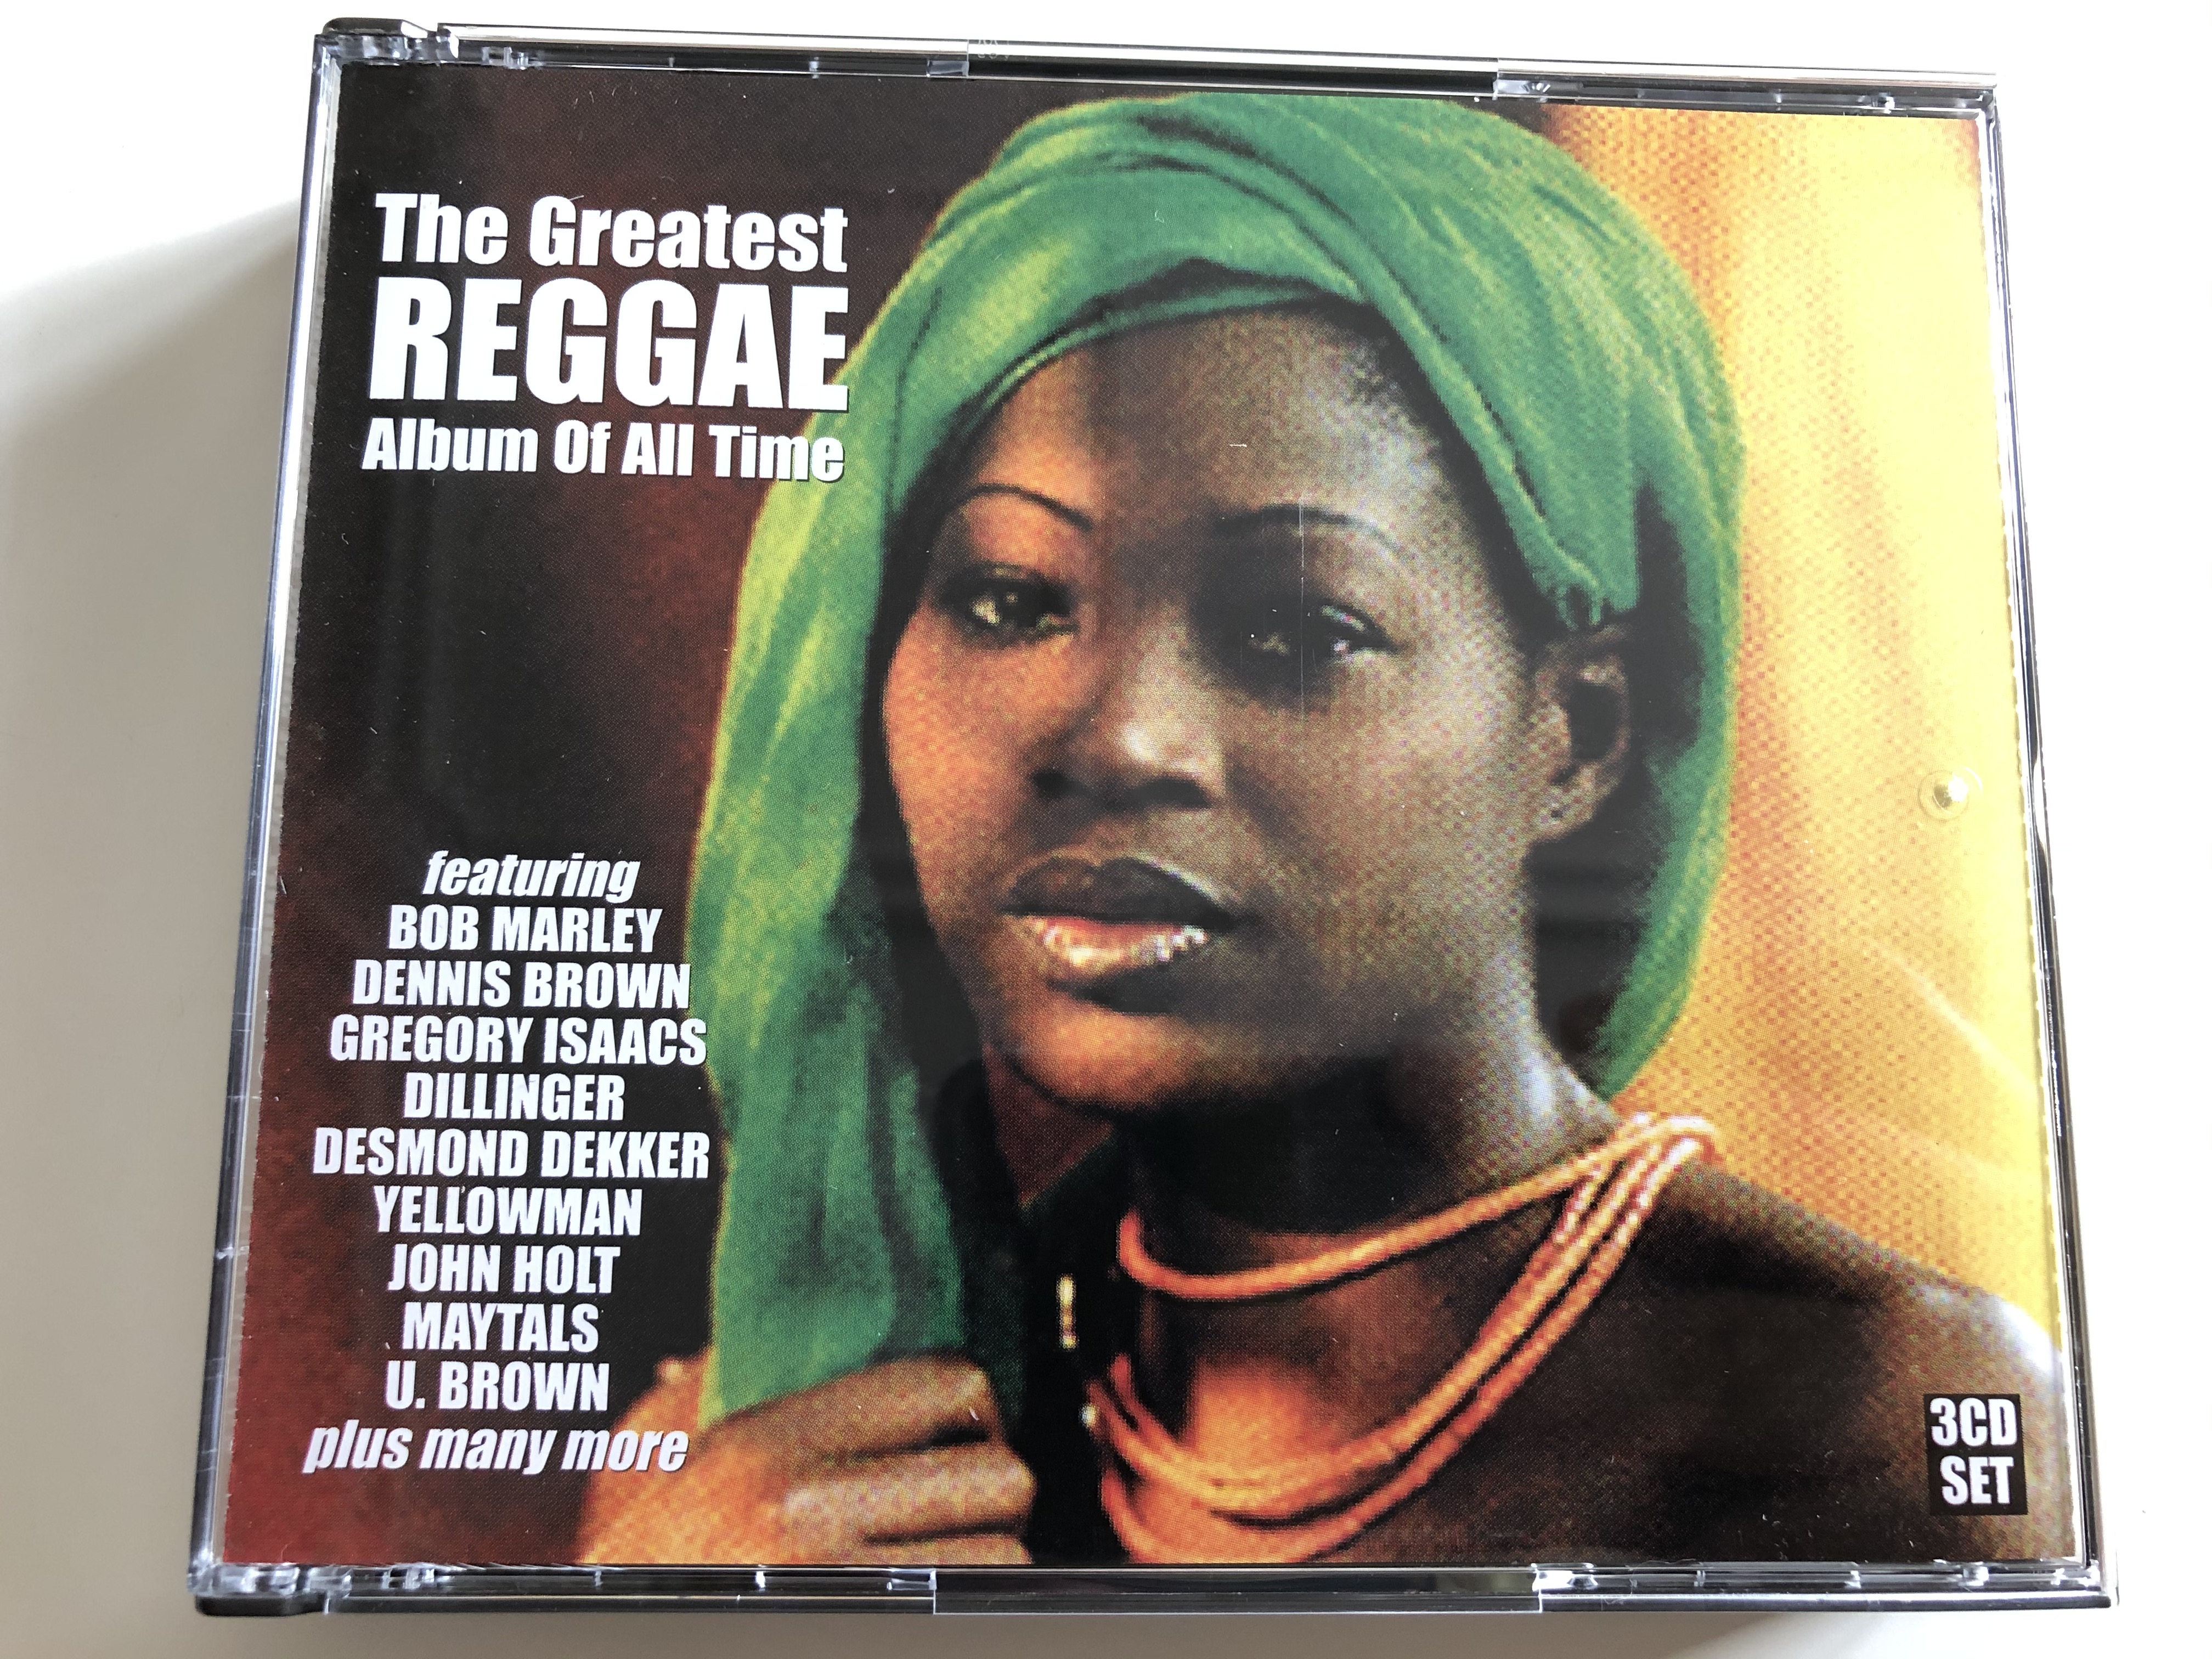 the-greatest-reggae-album-of-all-time-featuring-bob-marley-dennis-brown-gregory-isaacs-dillinger-desmond-dekker-yellowman-john-holt-maytals-u.-brown-plus-many-more-dressed-to-kill-3x-au-1-.jpg